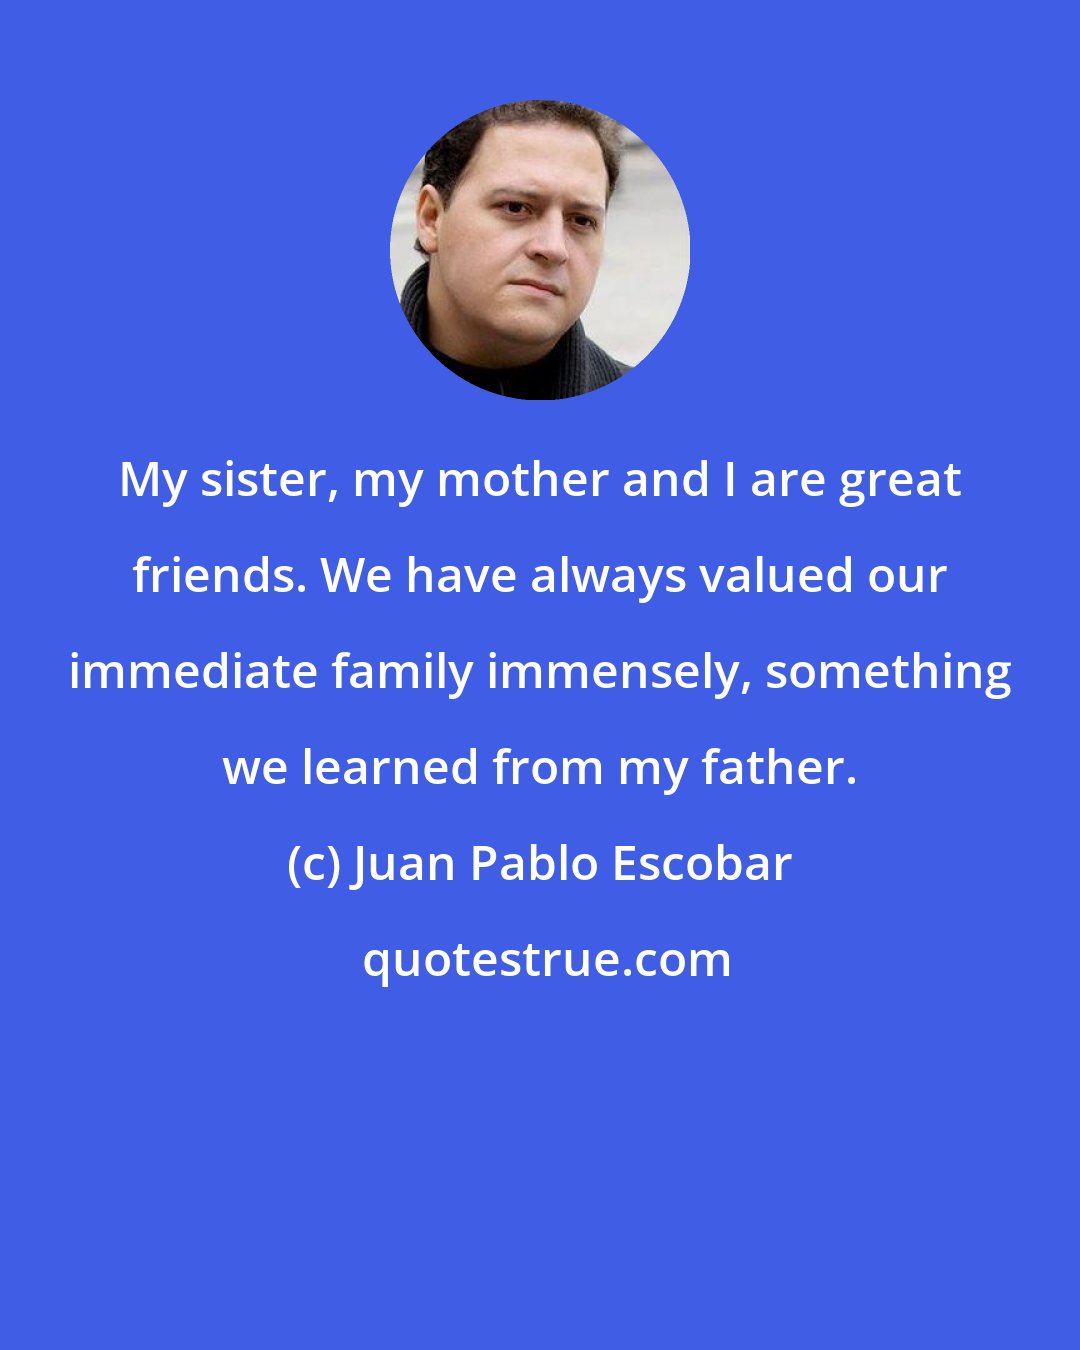 Juan Pablo Escobar: My sister, my mother and I are great friends. We have always valued our immediate family immensely, something we learned from my father.